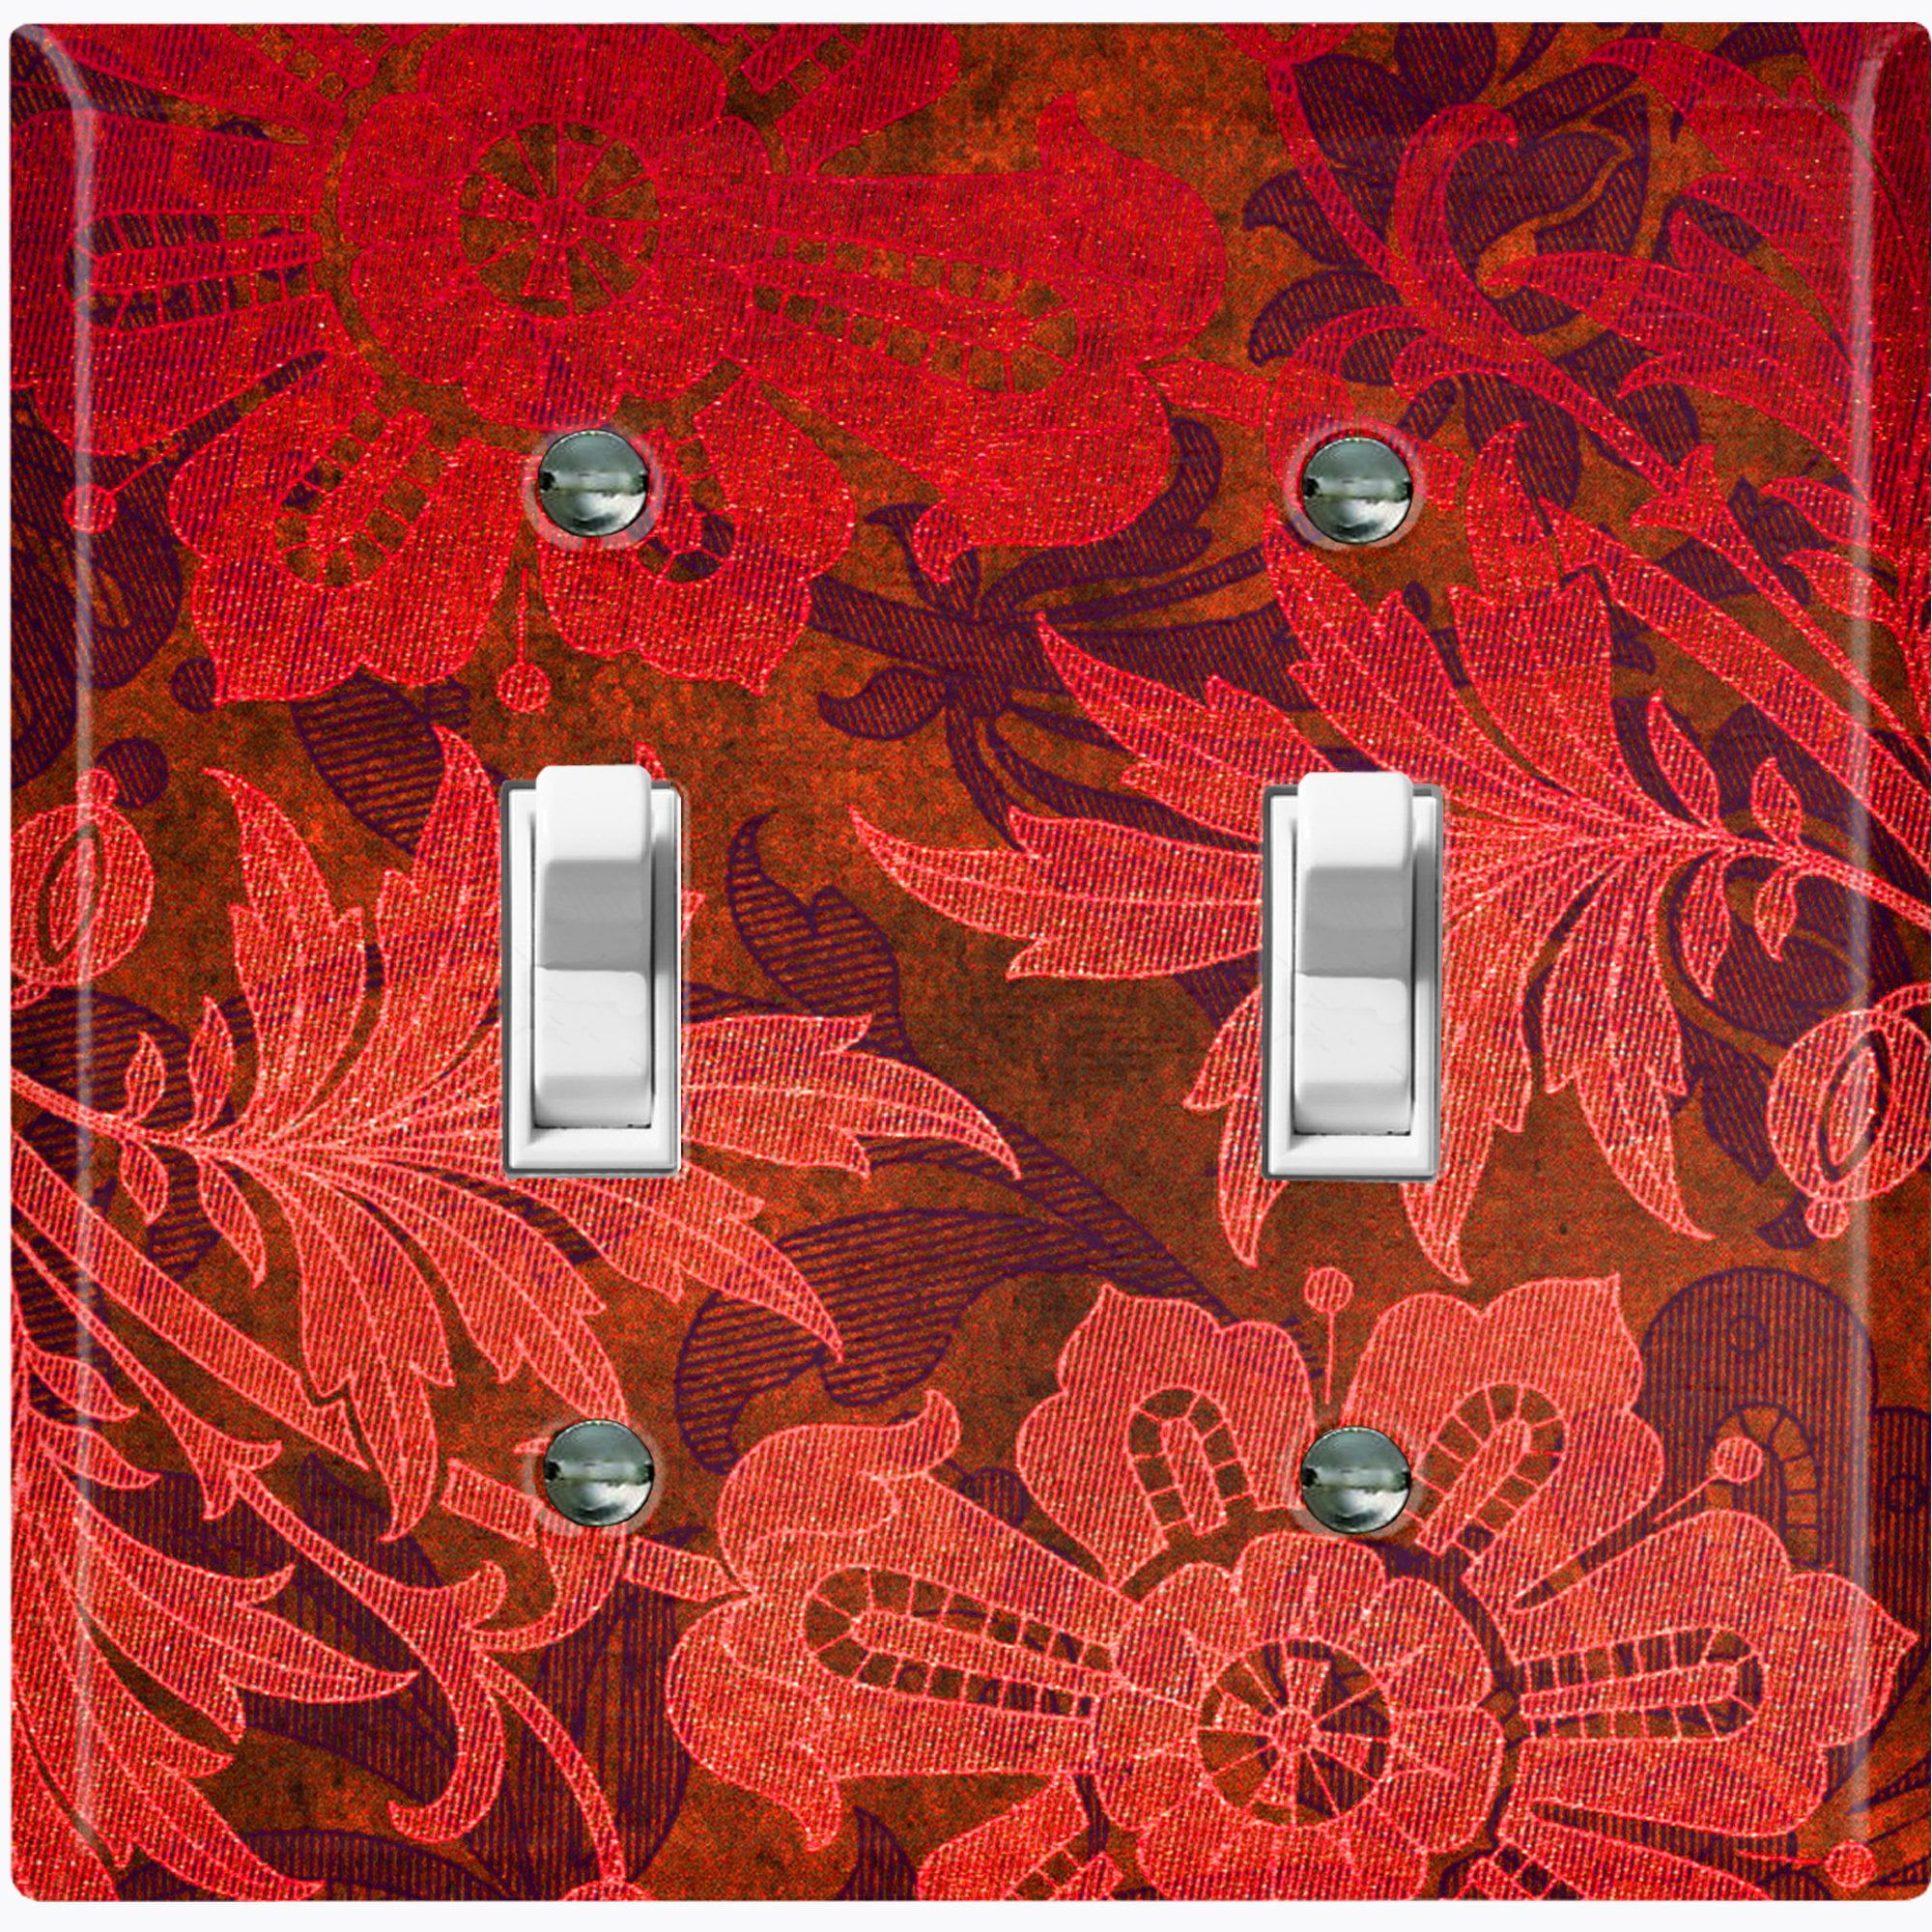 Floral Damask Home Decor Red Damask Design Metal Light Switch Plate Cover 